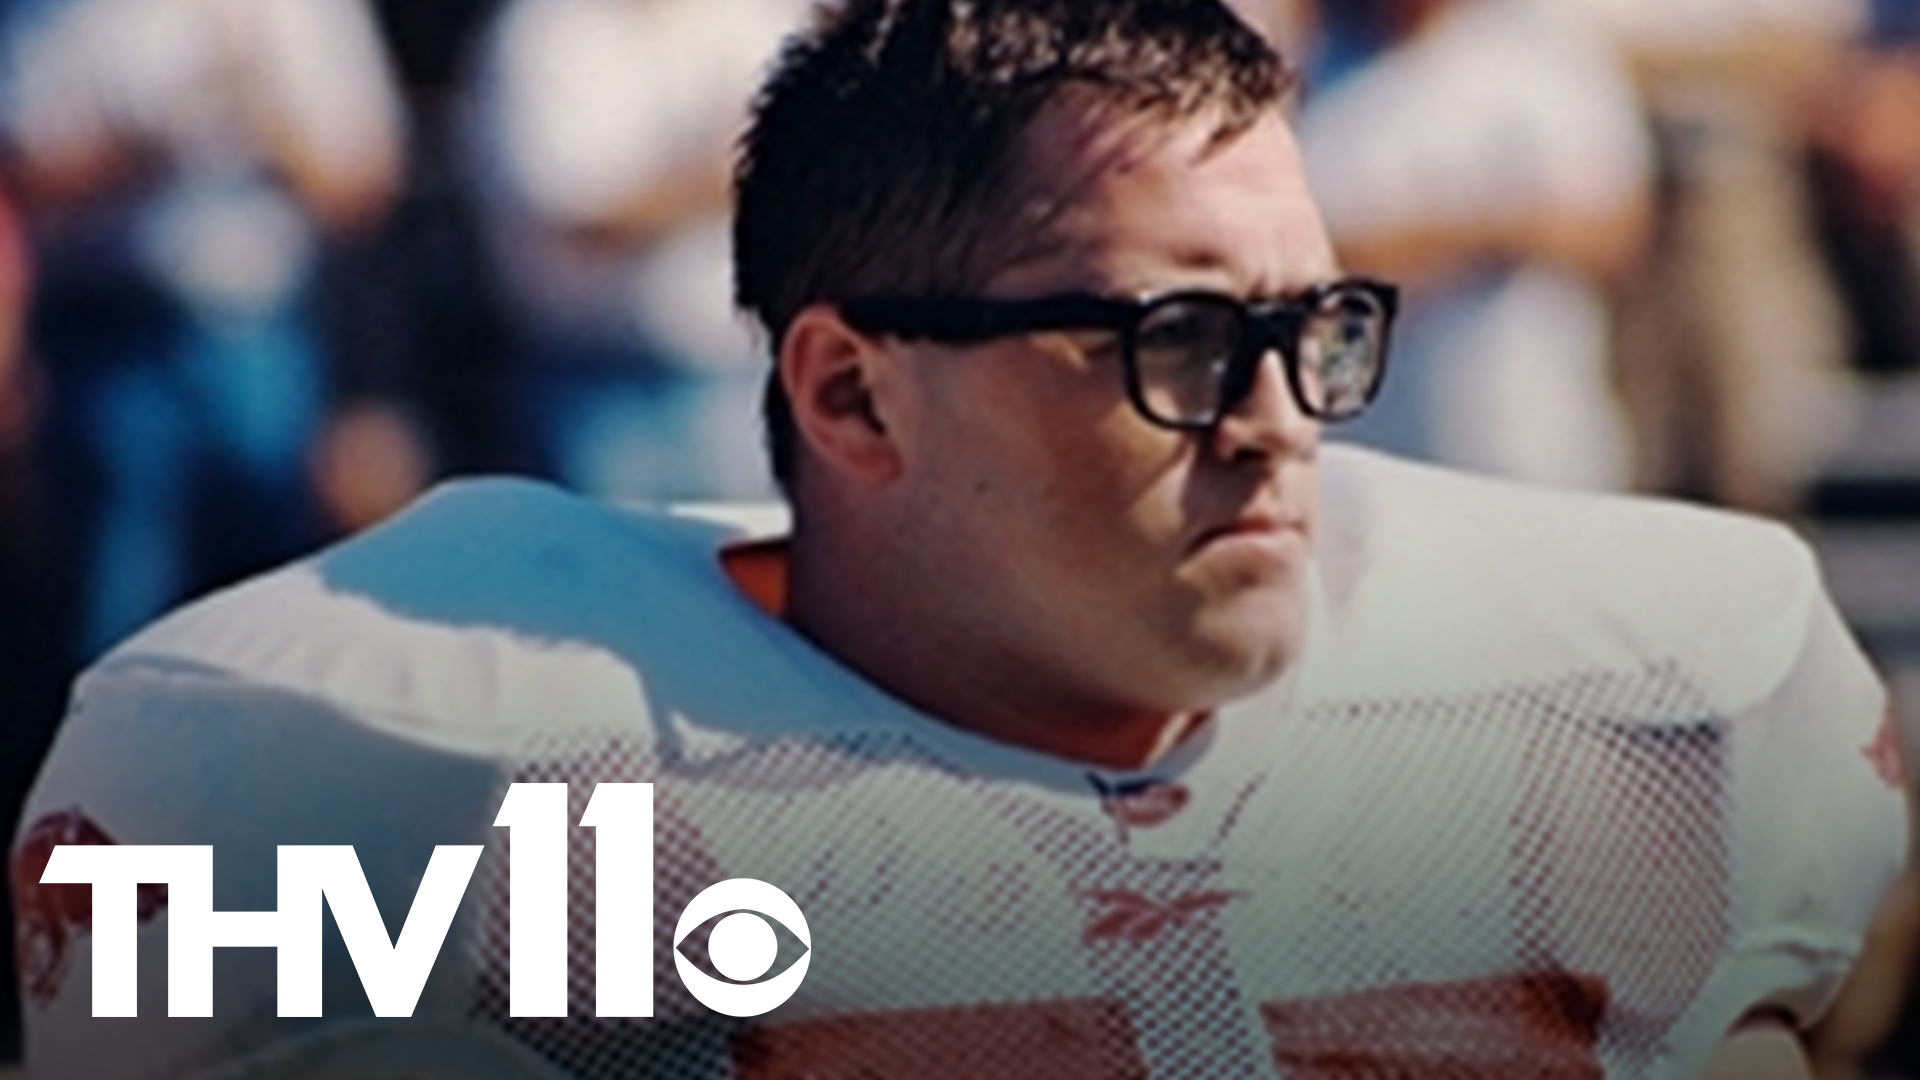 This Saturday, the Brandon Burlsworth Foundation will be holding their annual football camp at War Memorial Stadium.